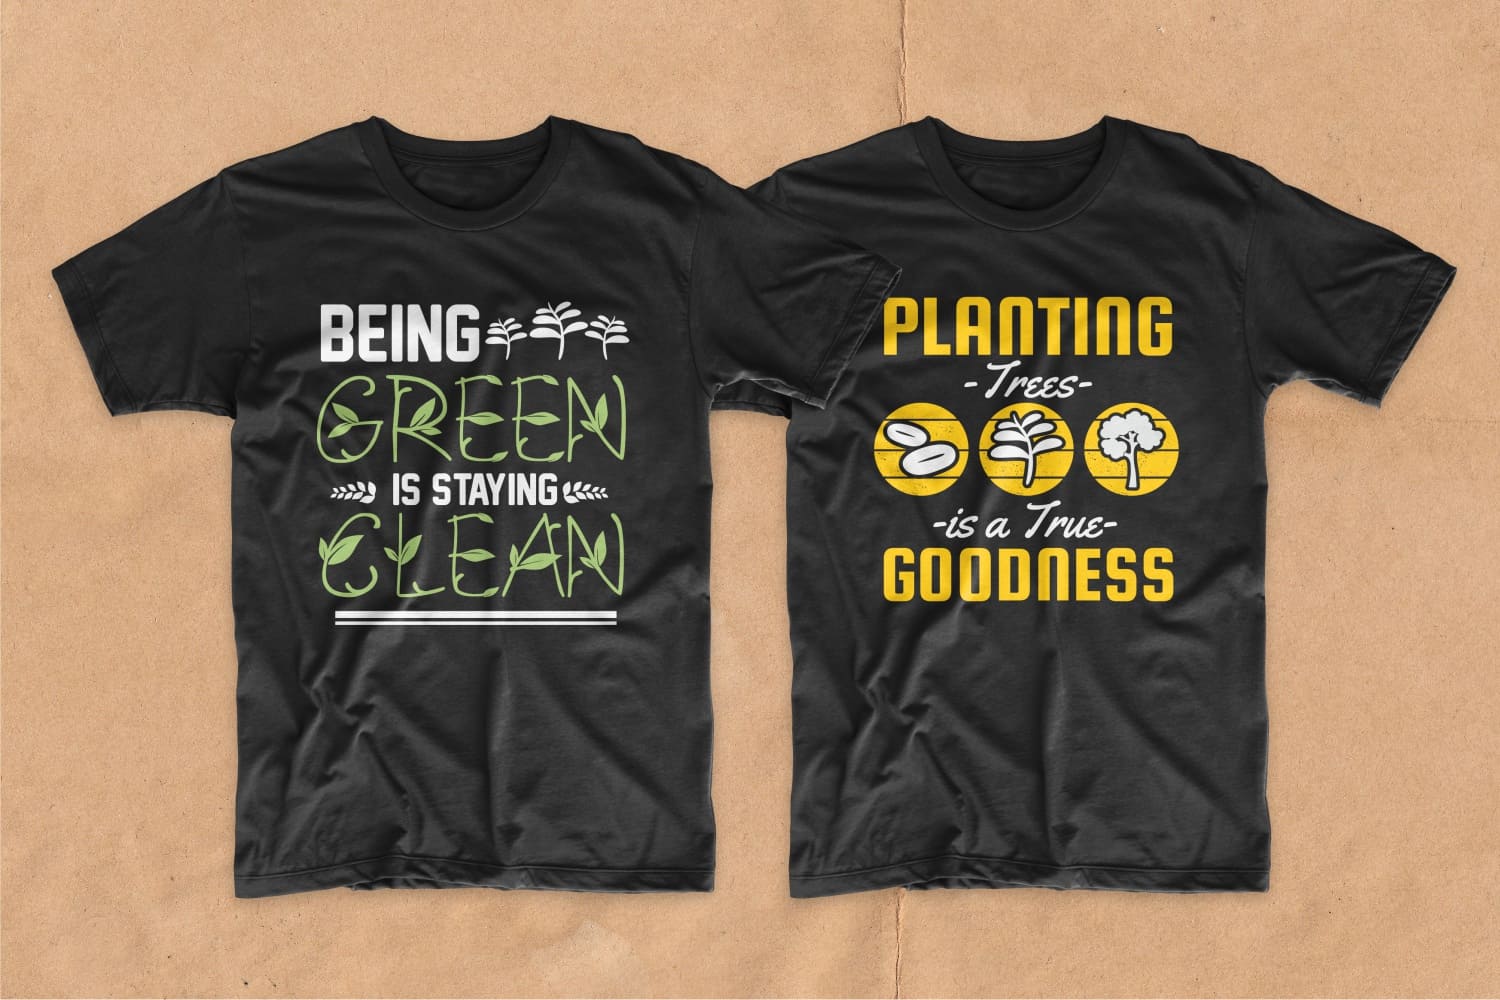 Two black T-shirts with green and yellow lettering.